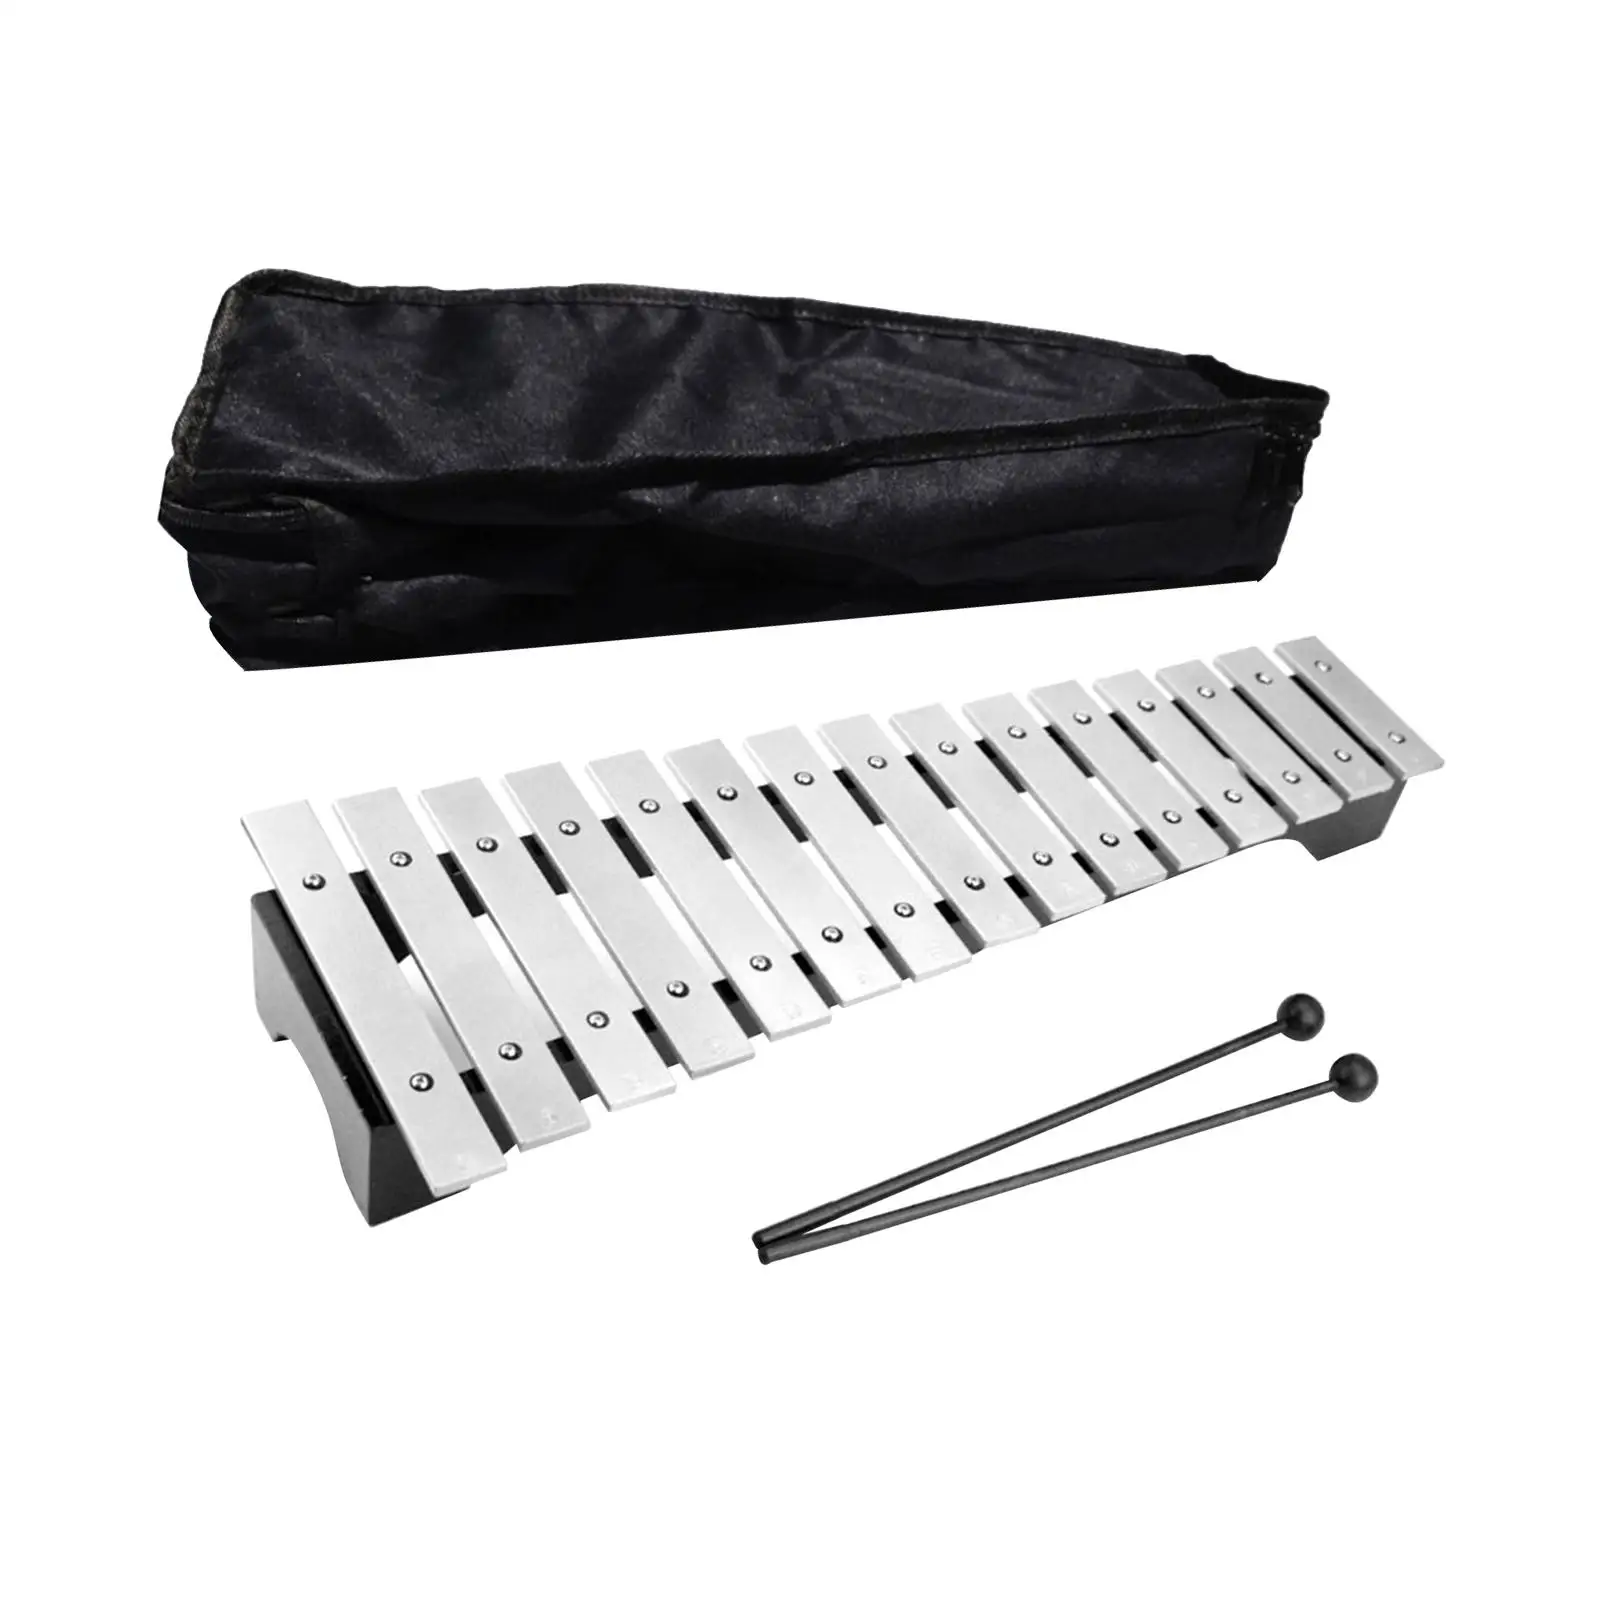 15 Note Metal Xylophone Glockenspiel Xylophone for Kids and Adult Stage Band